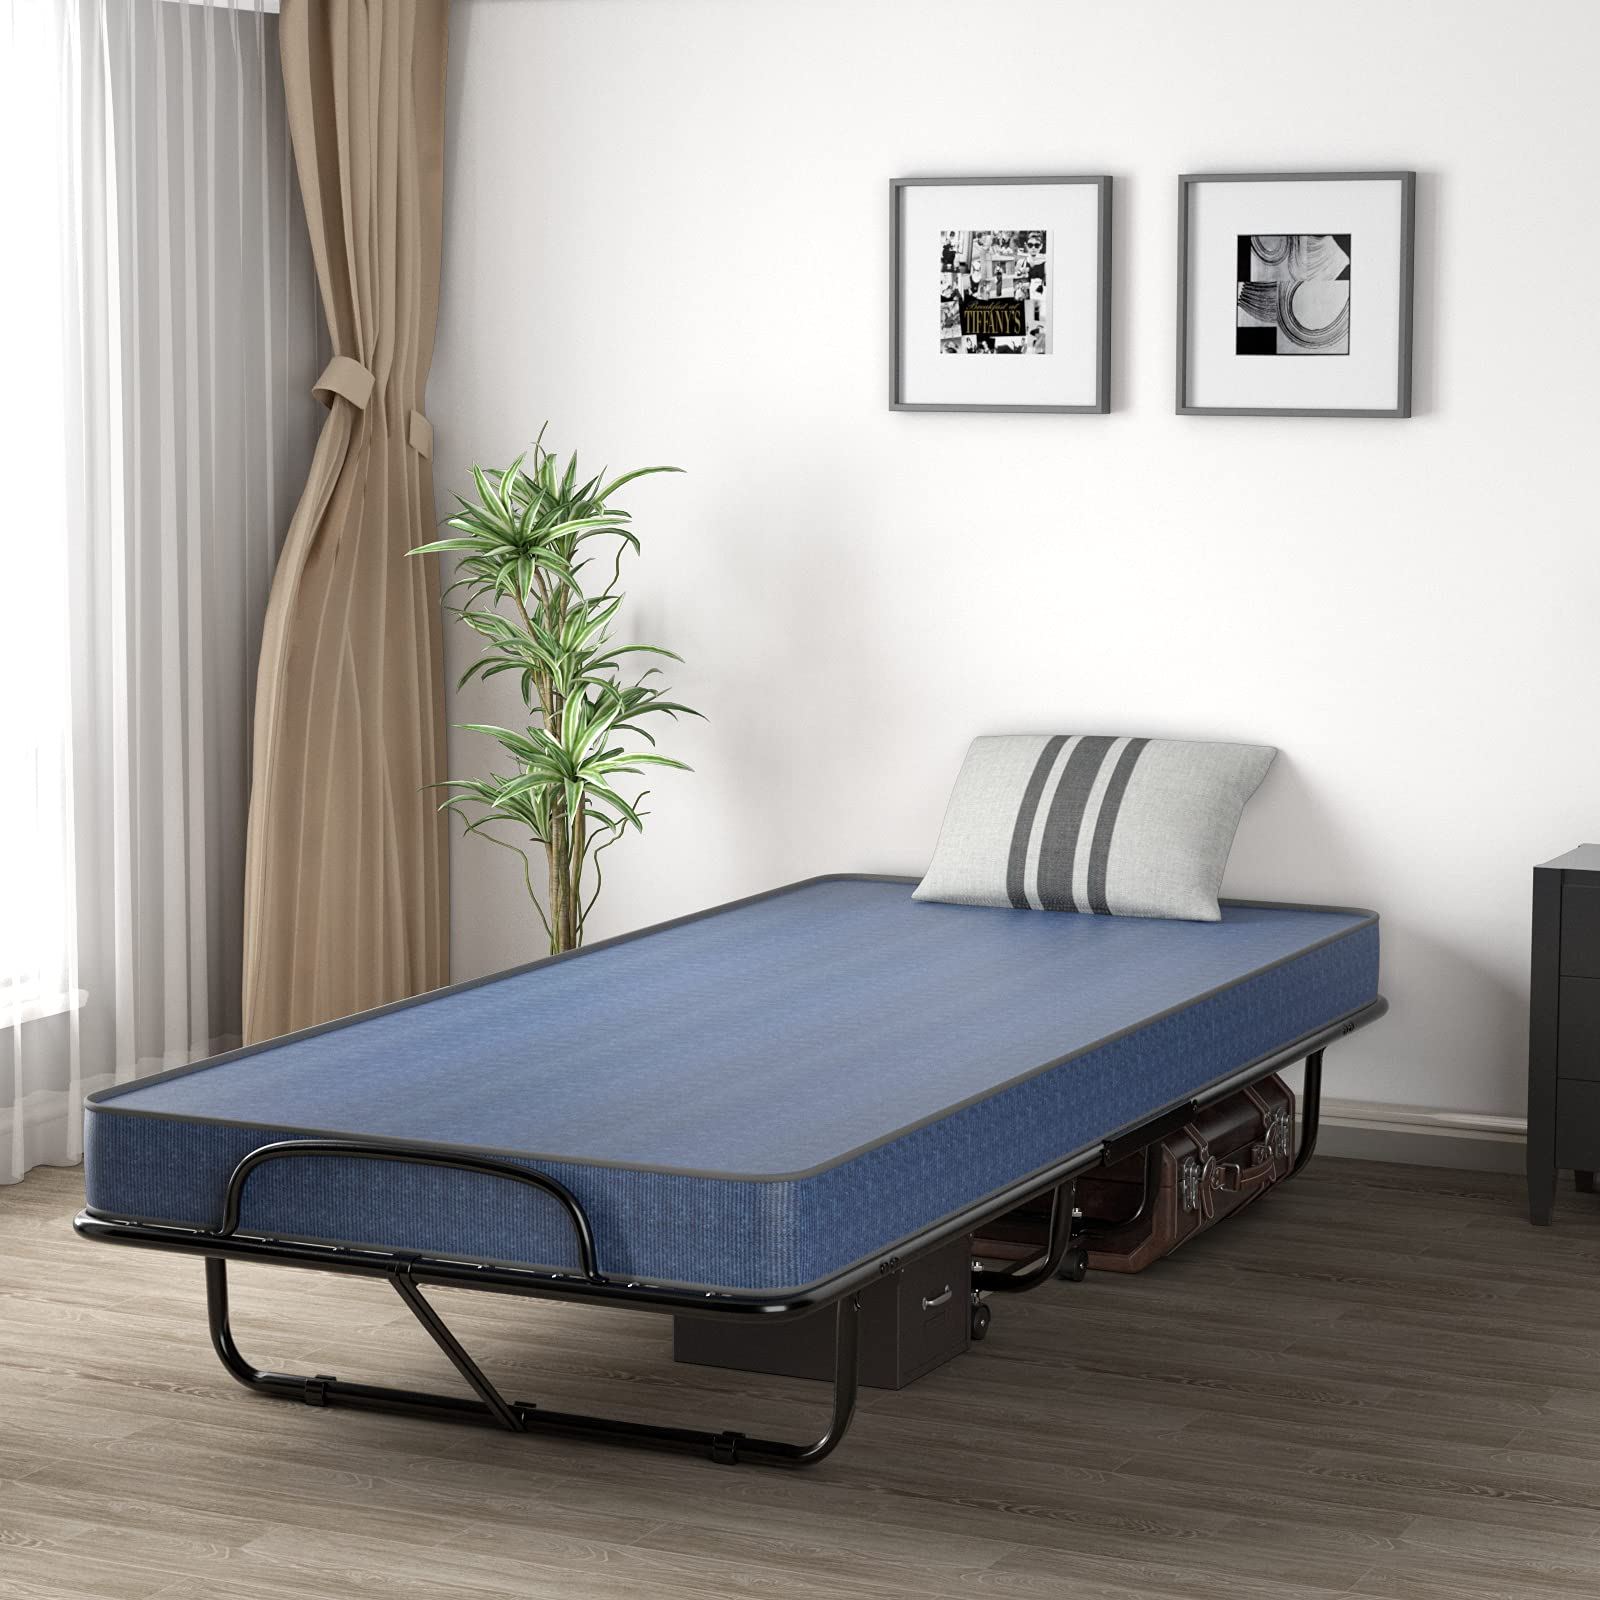 Giantex Rollaway Folding Bed w/Mattress for Adults, 79 x 39 Inch Twin Portable Foldable Guest Bed w/Sturdy Metal Frame